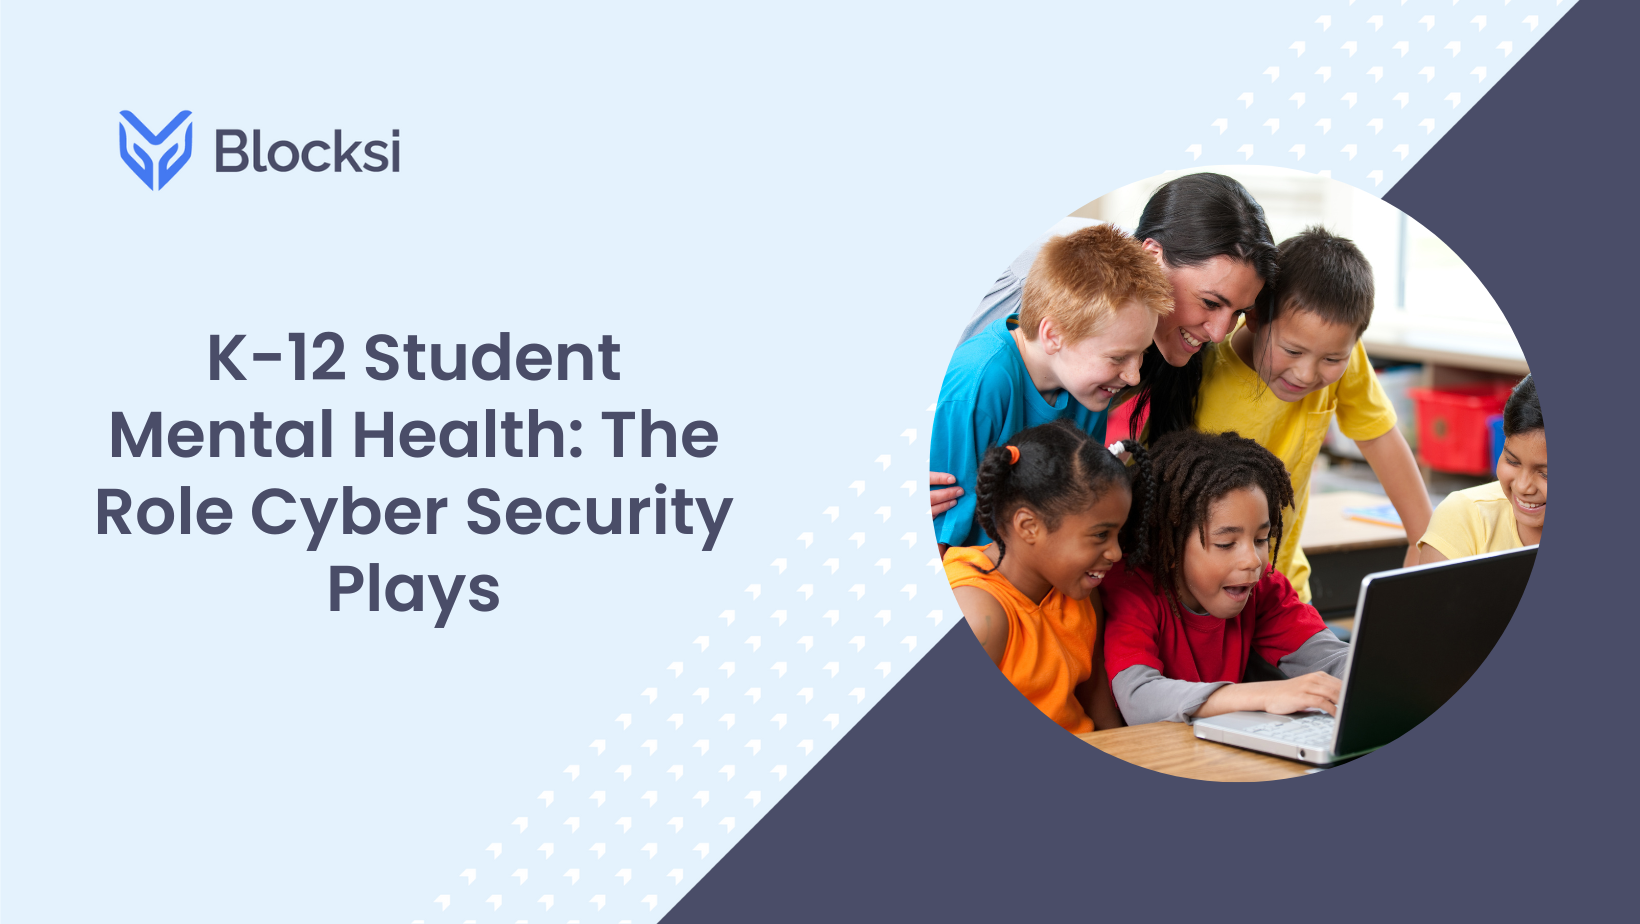 K-12 Student Mental Health: The Role Cyber Security Plays